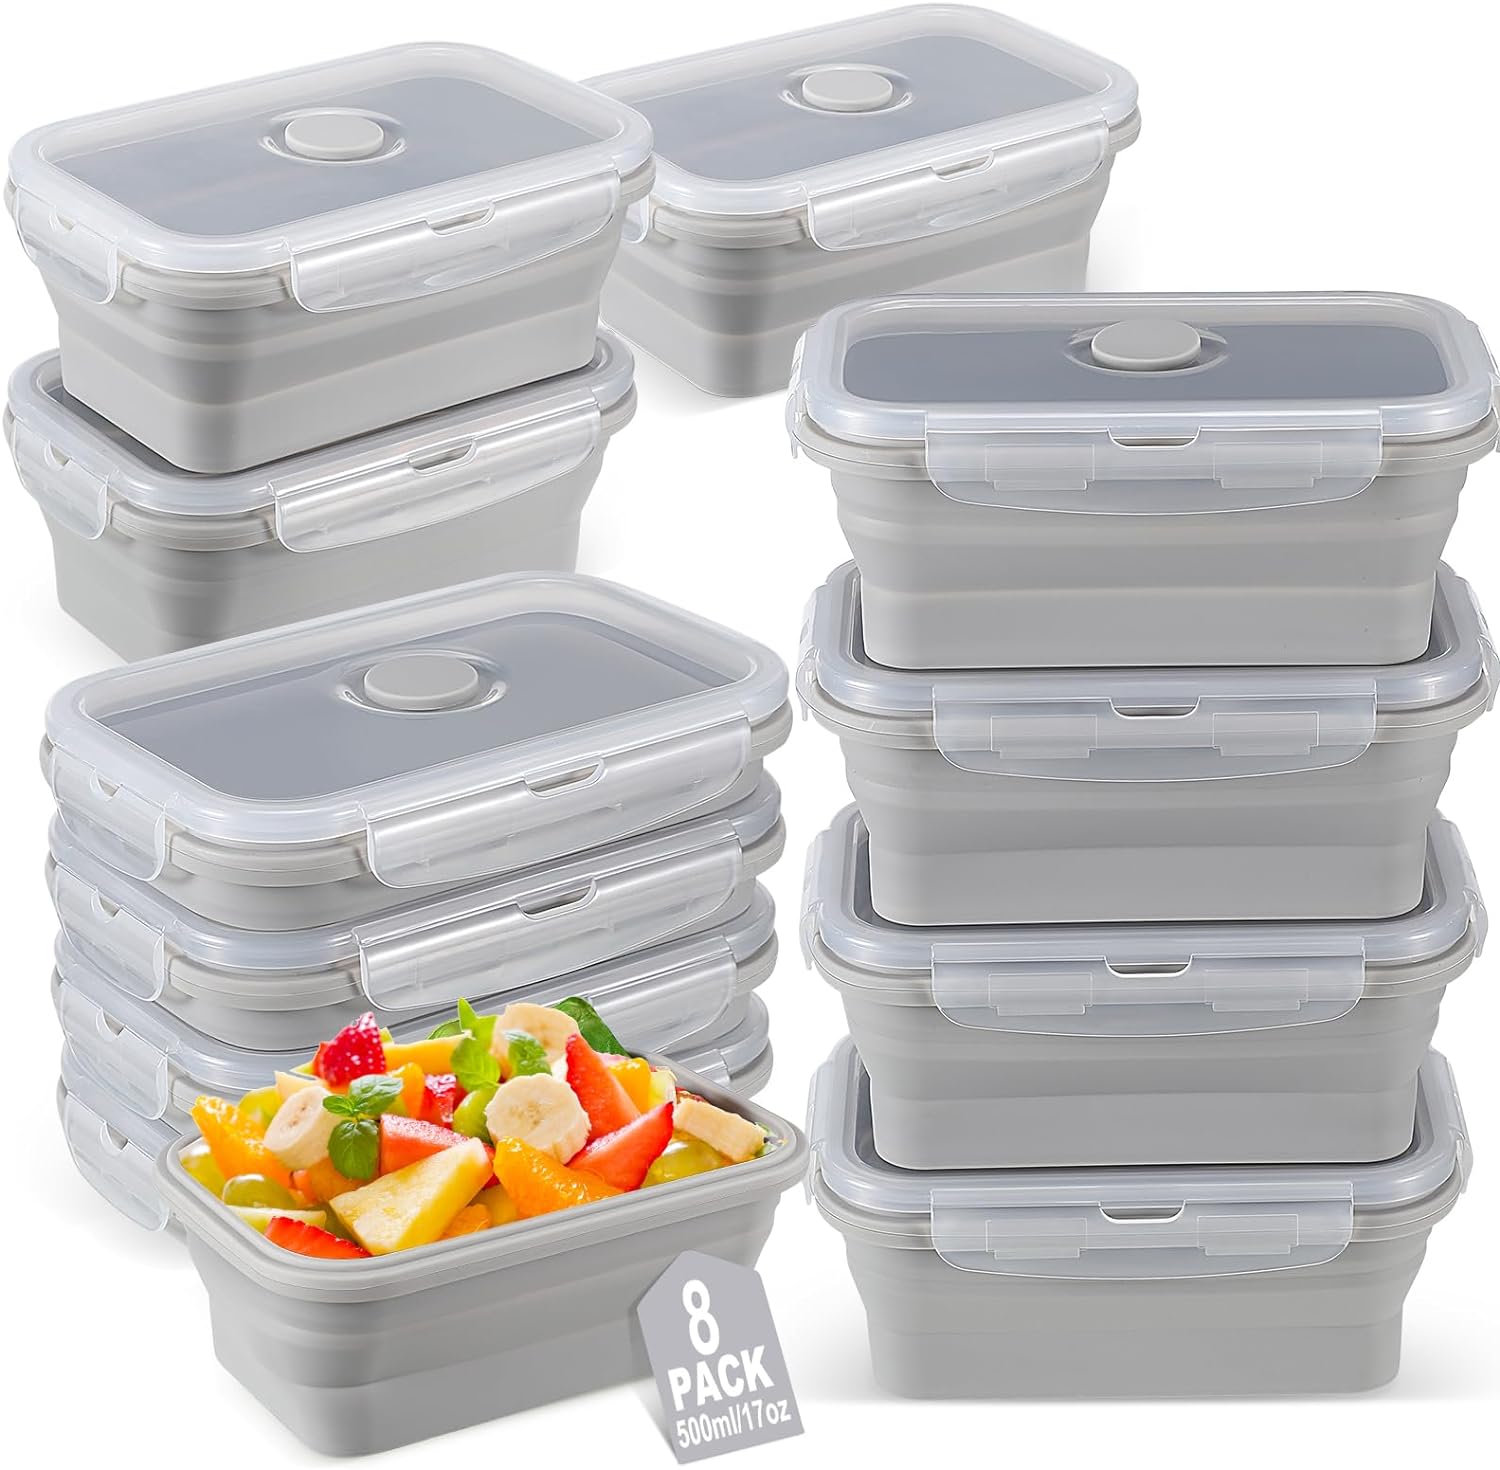 Dandat 12 Pack Silicone Collapsible Food Storage Containers 12 oz